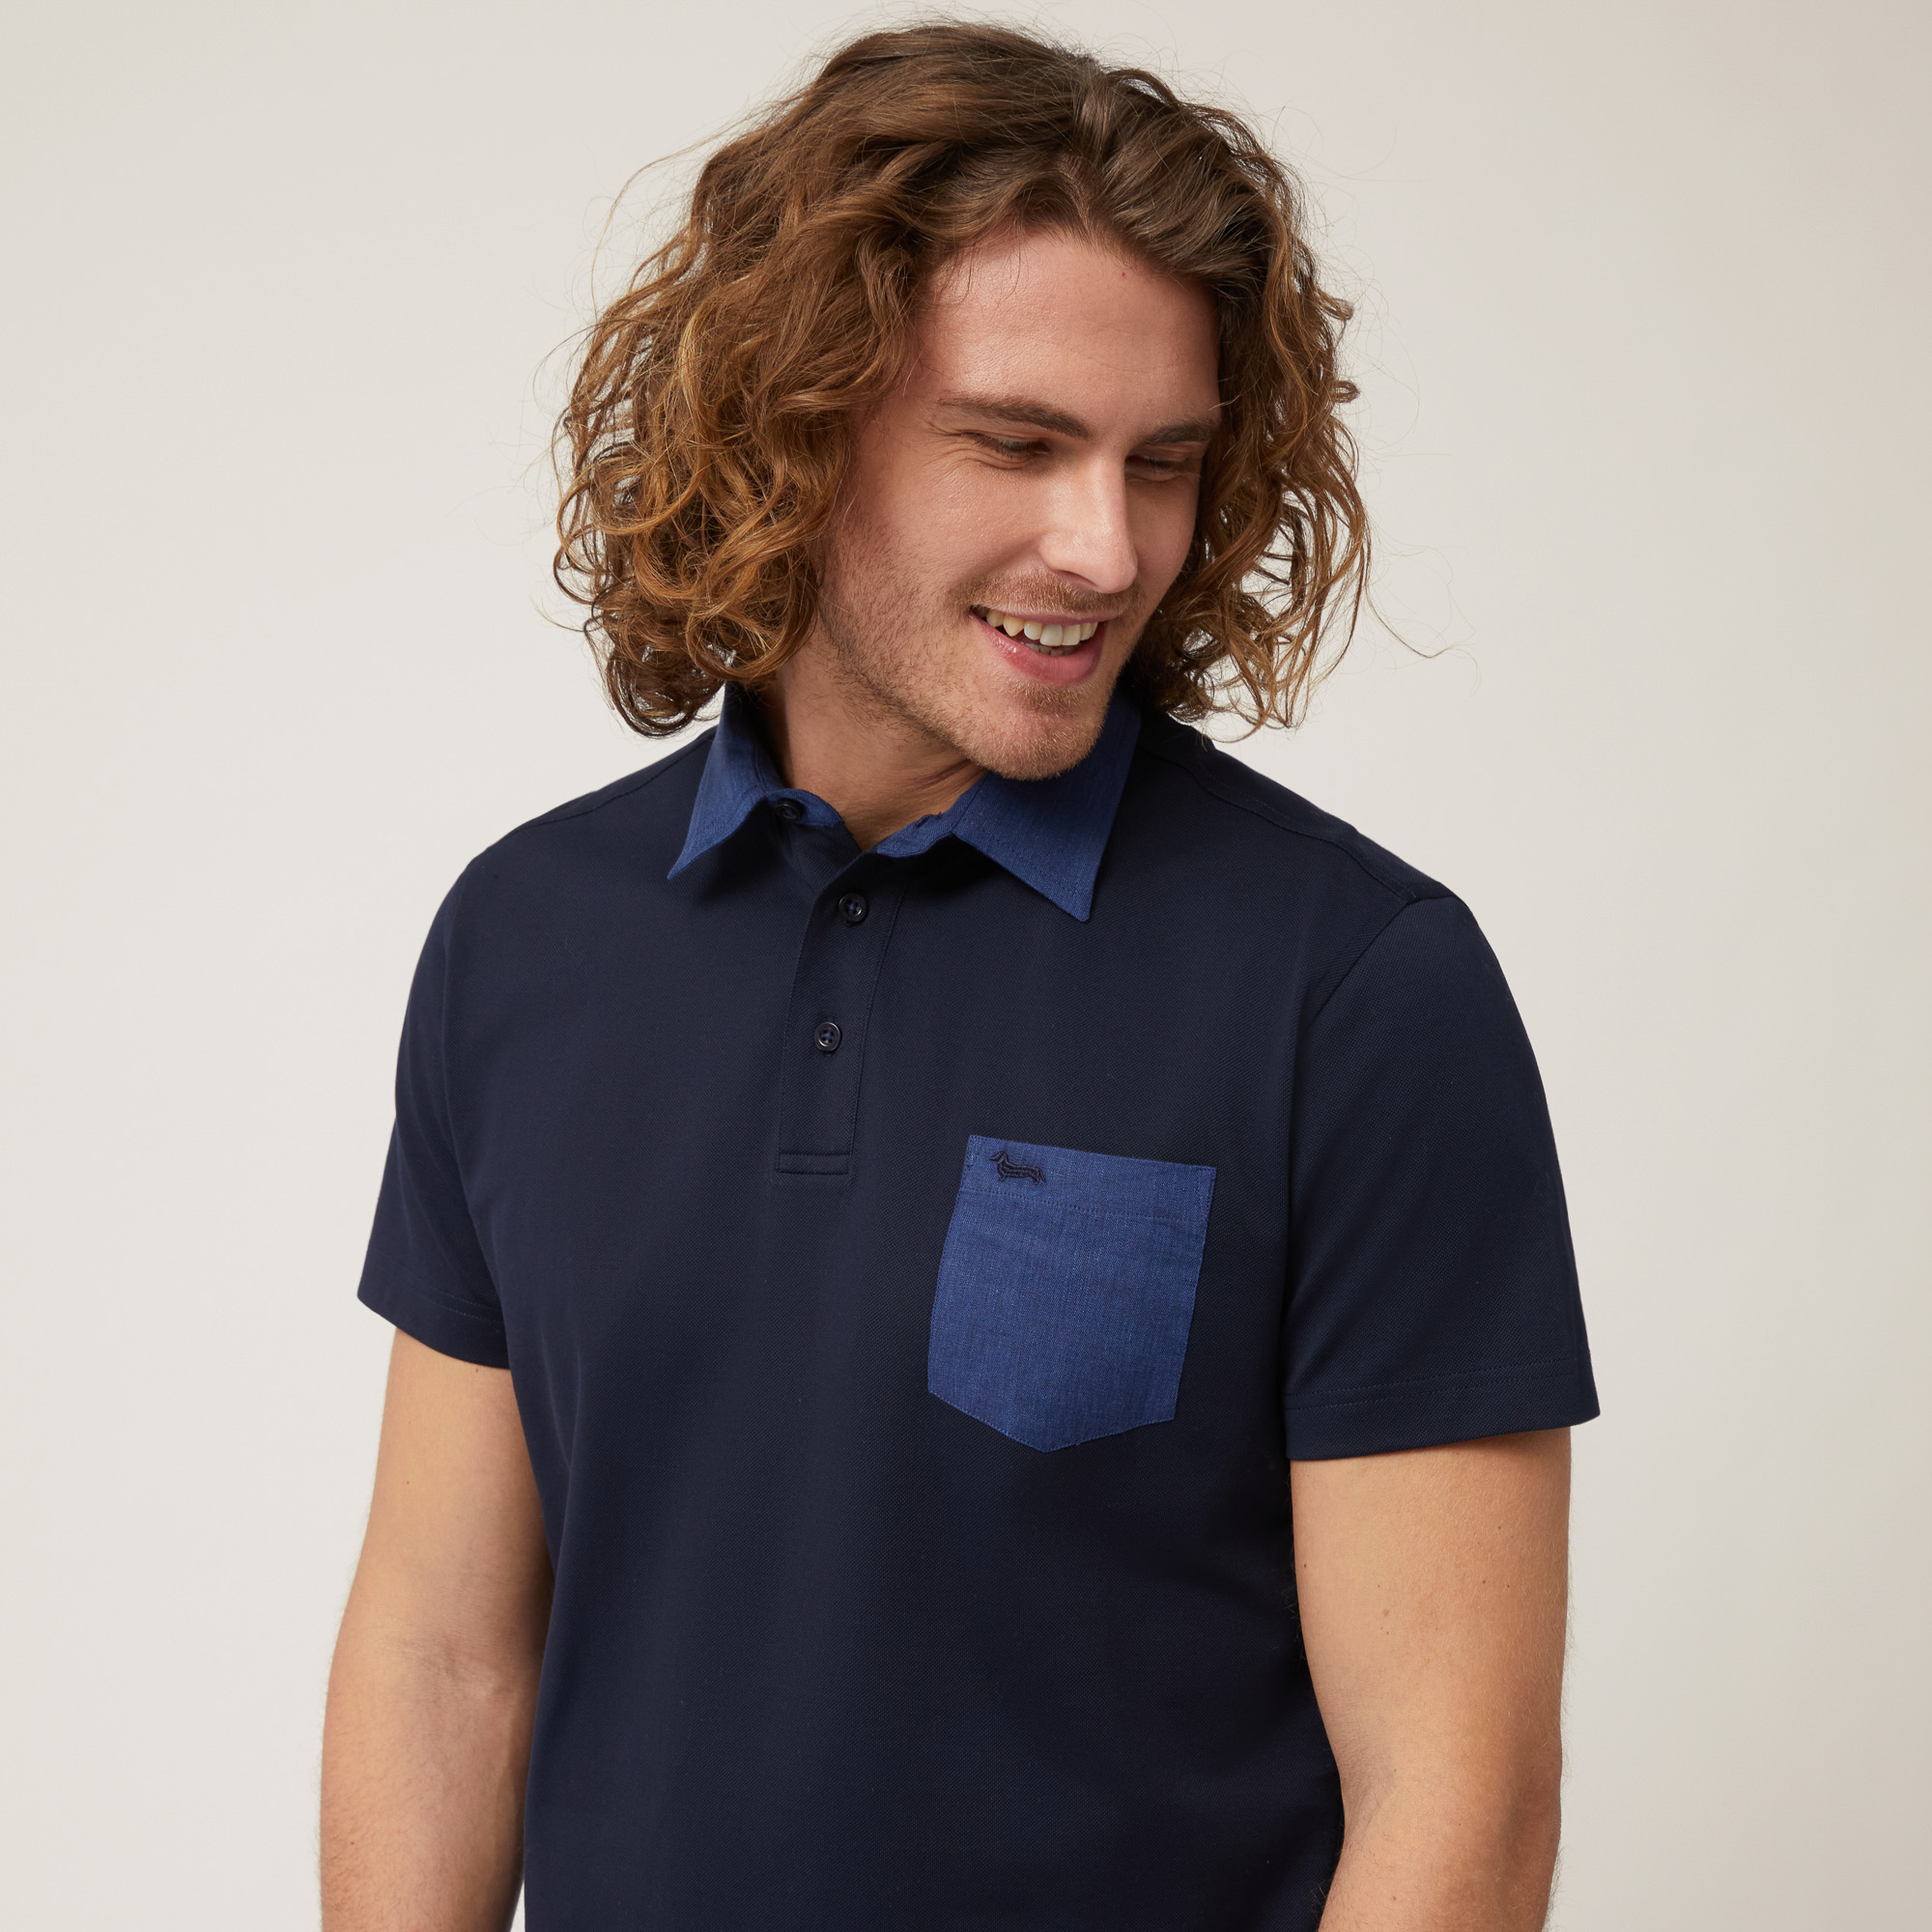 Polo Con Taschino, Blu Navy, large image number 2